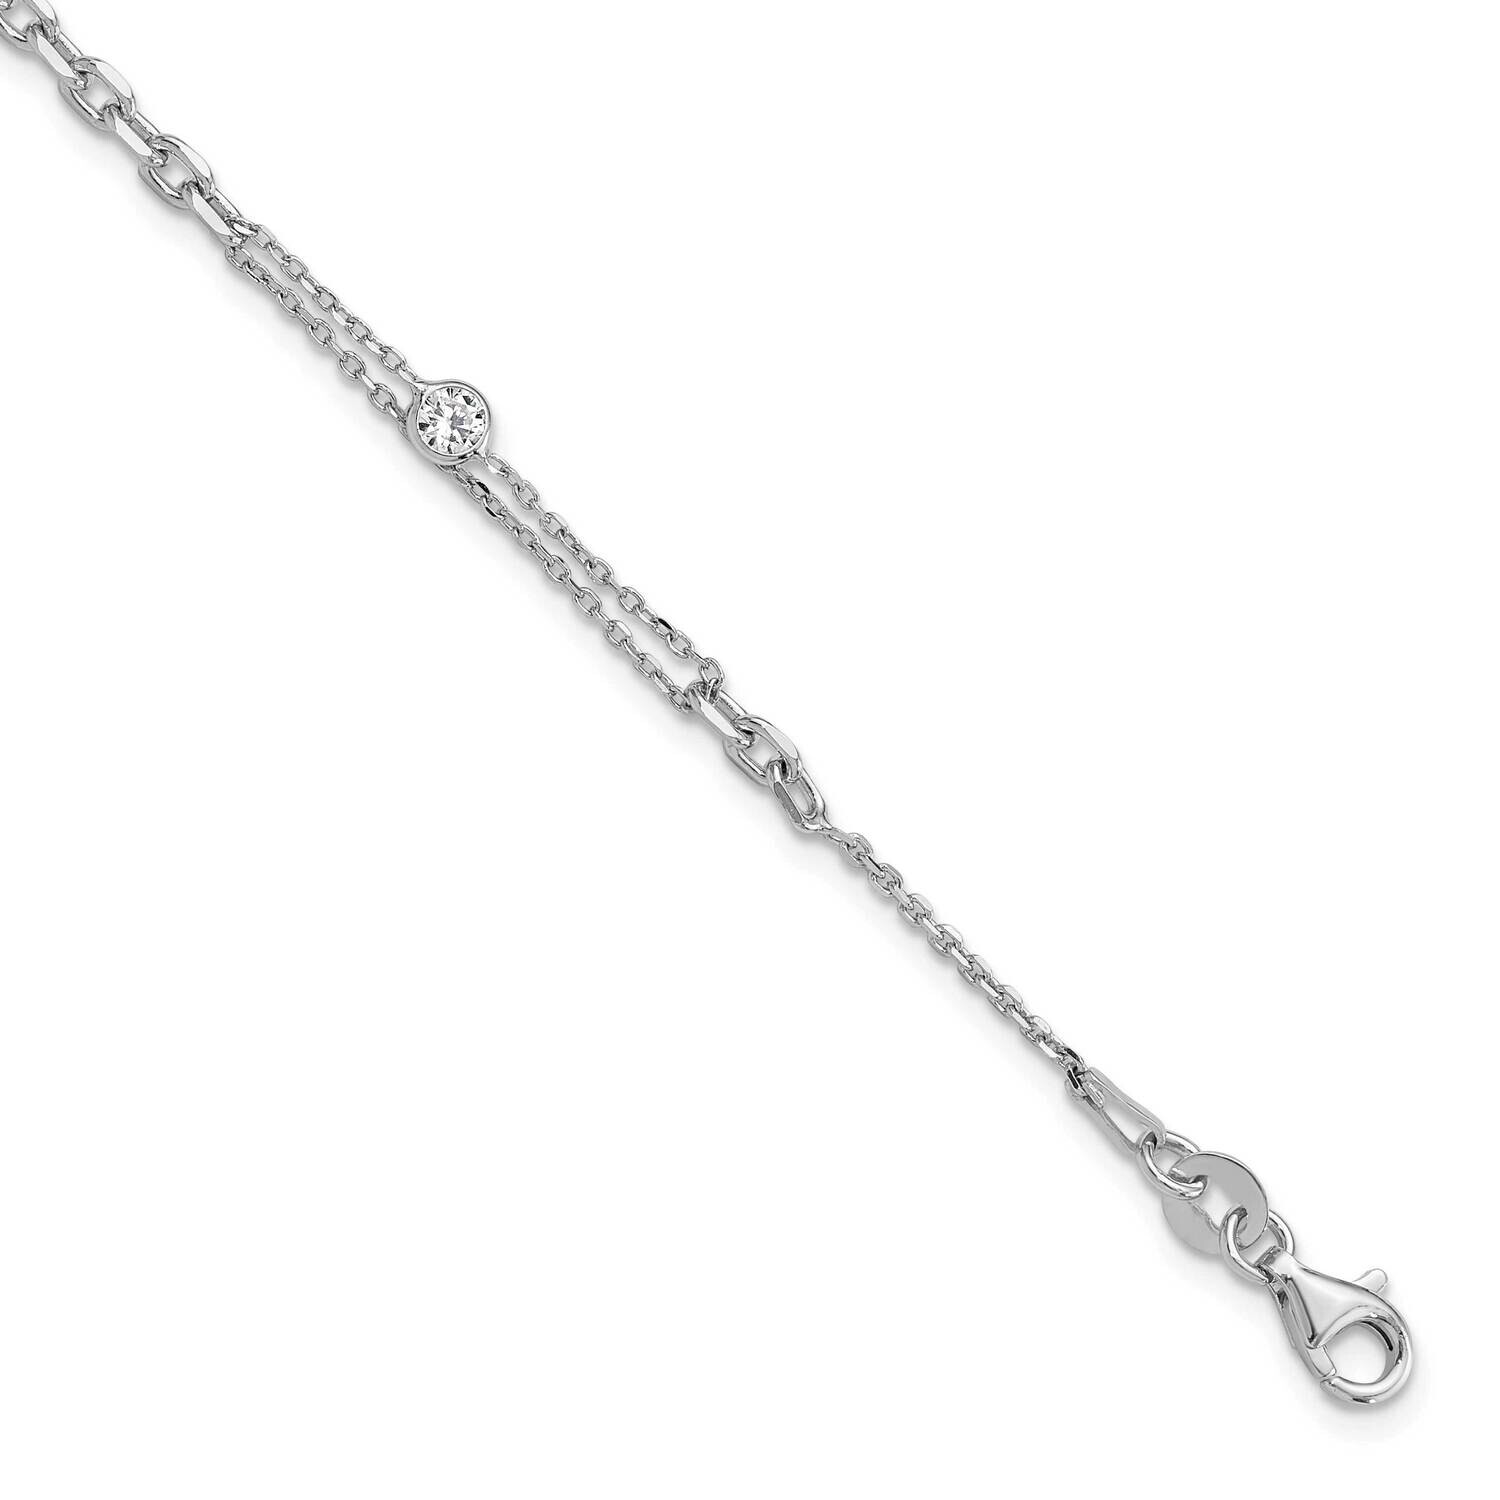 Polished 7 Inch 1 Inch Extension Fancy CZ Bracelet Sterling Silver Rhodium-Plated QG6512-7